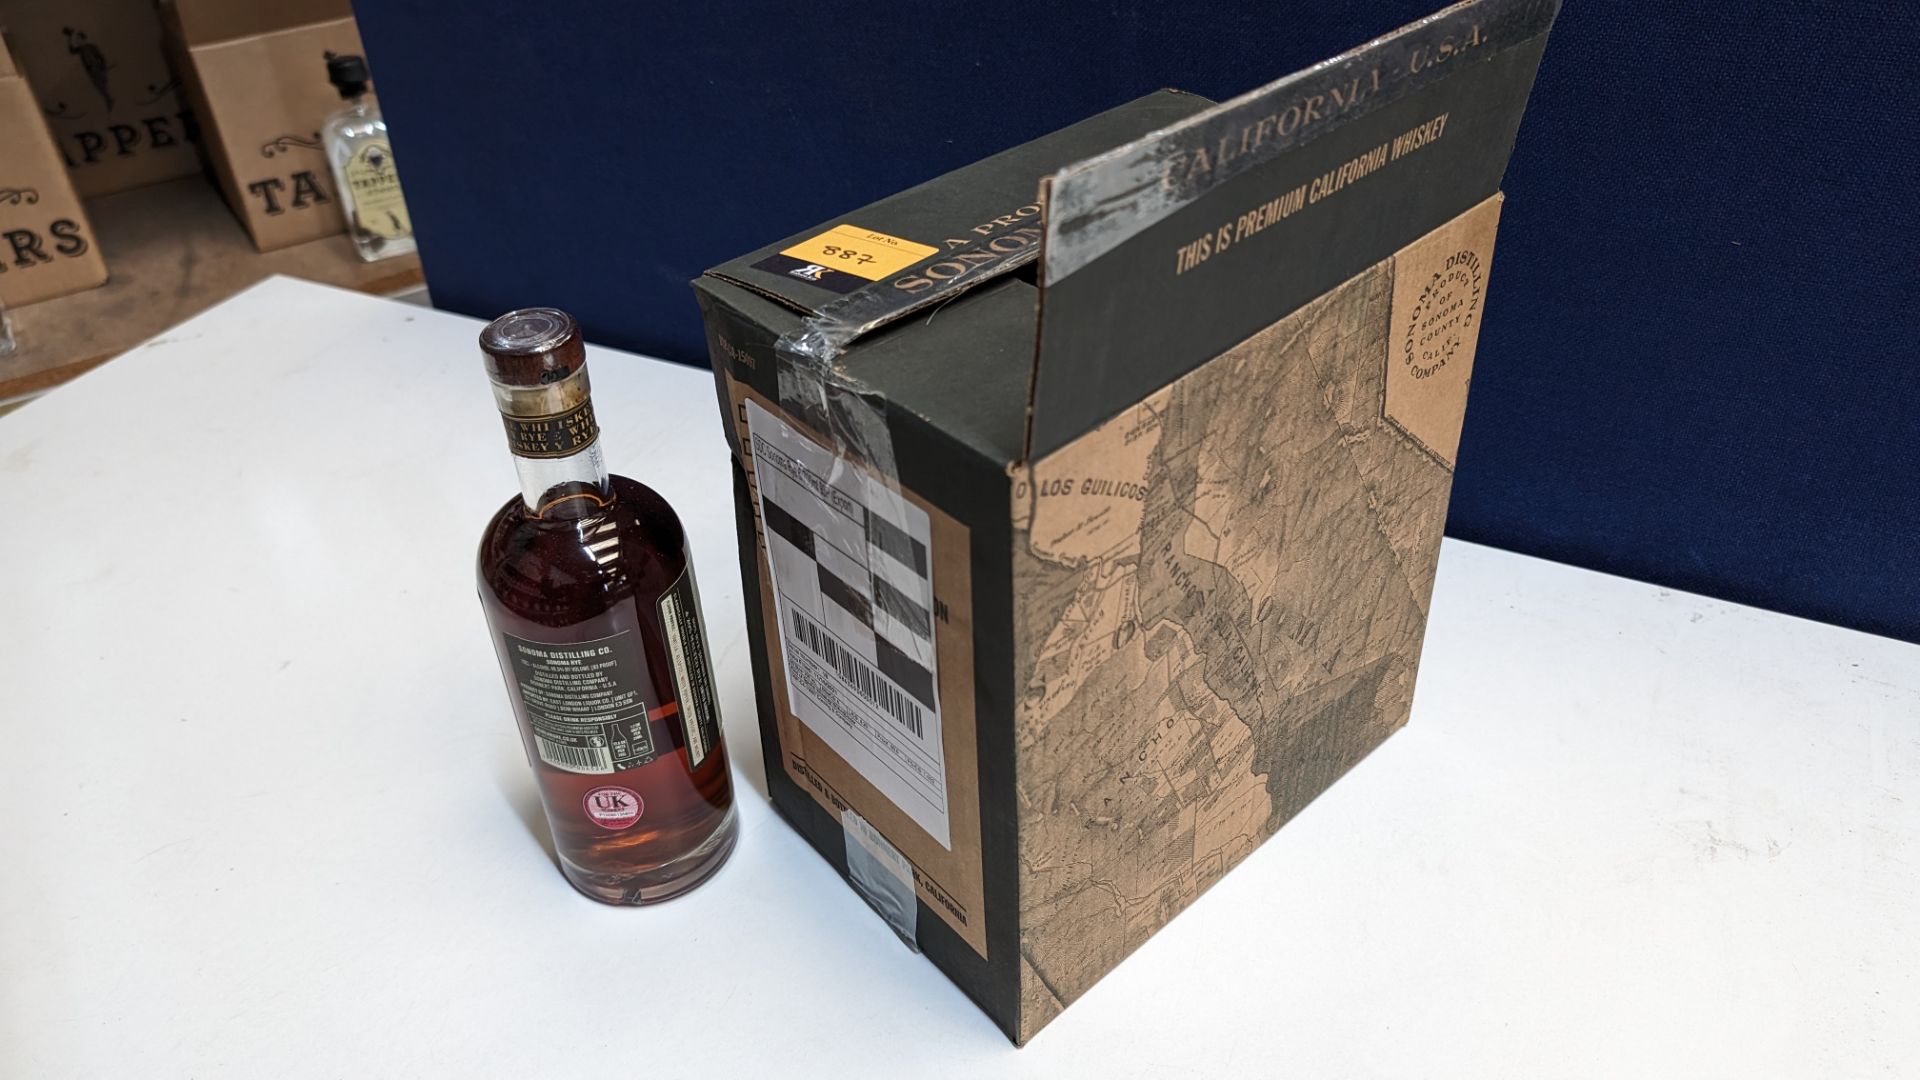 6 off 700ml bottles of Sonoma Rye Whiskey. In Sonoma branded box which includes bottling details on - Image 8 of 8